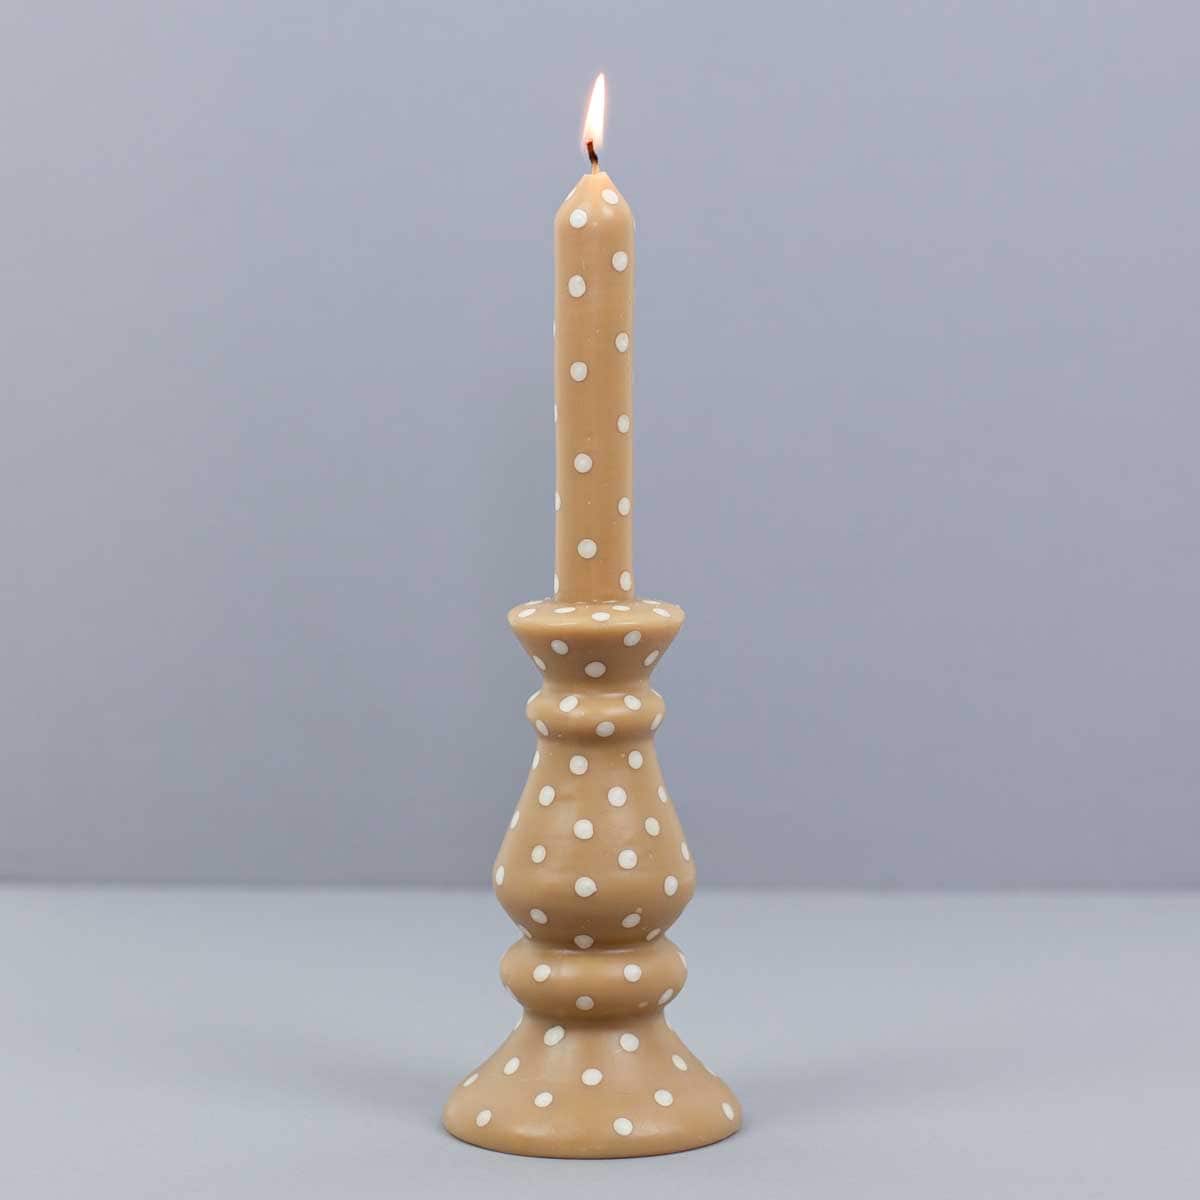 GLOW Candle, beige/white